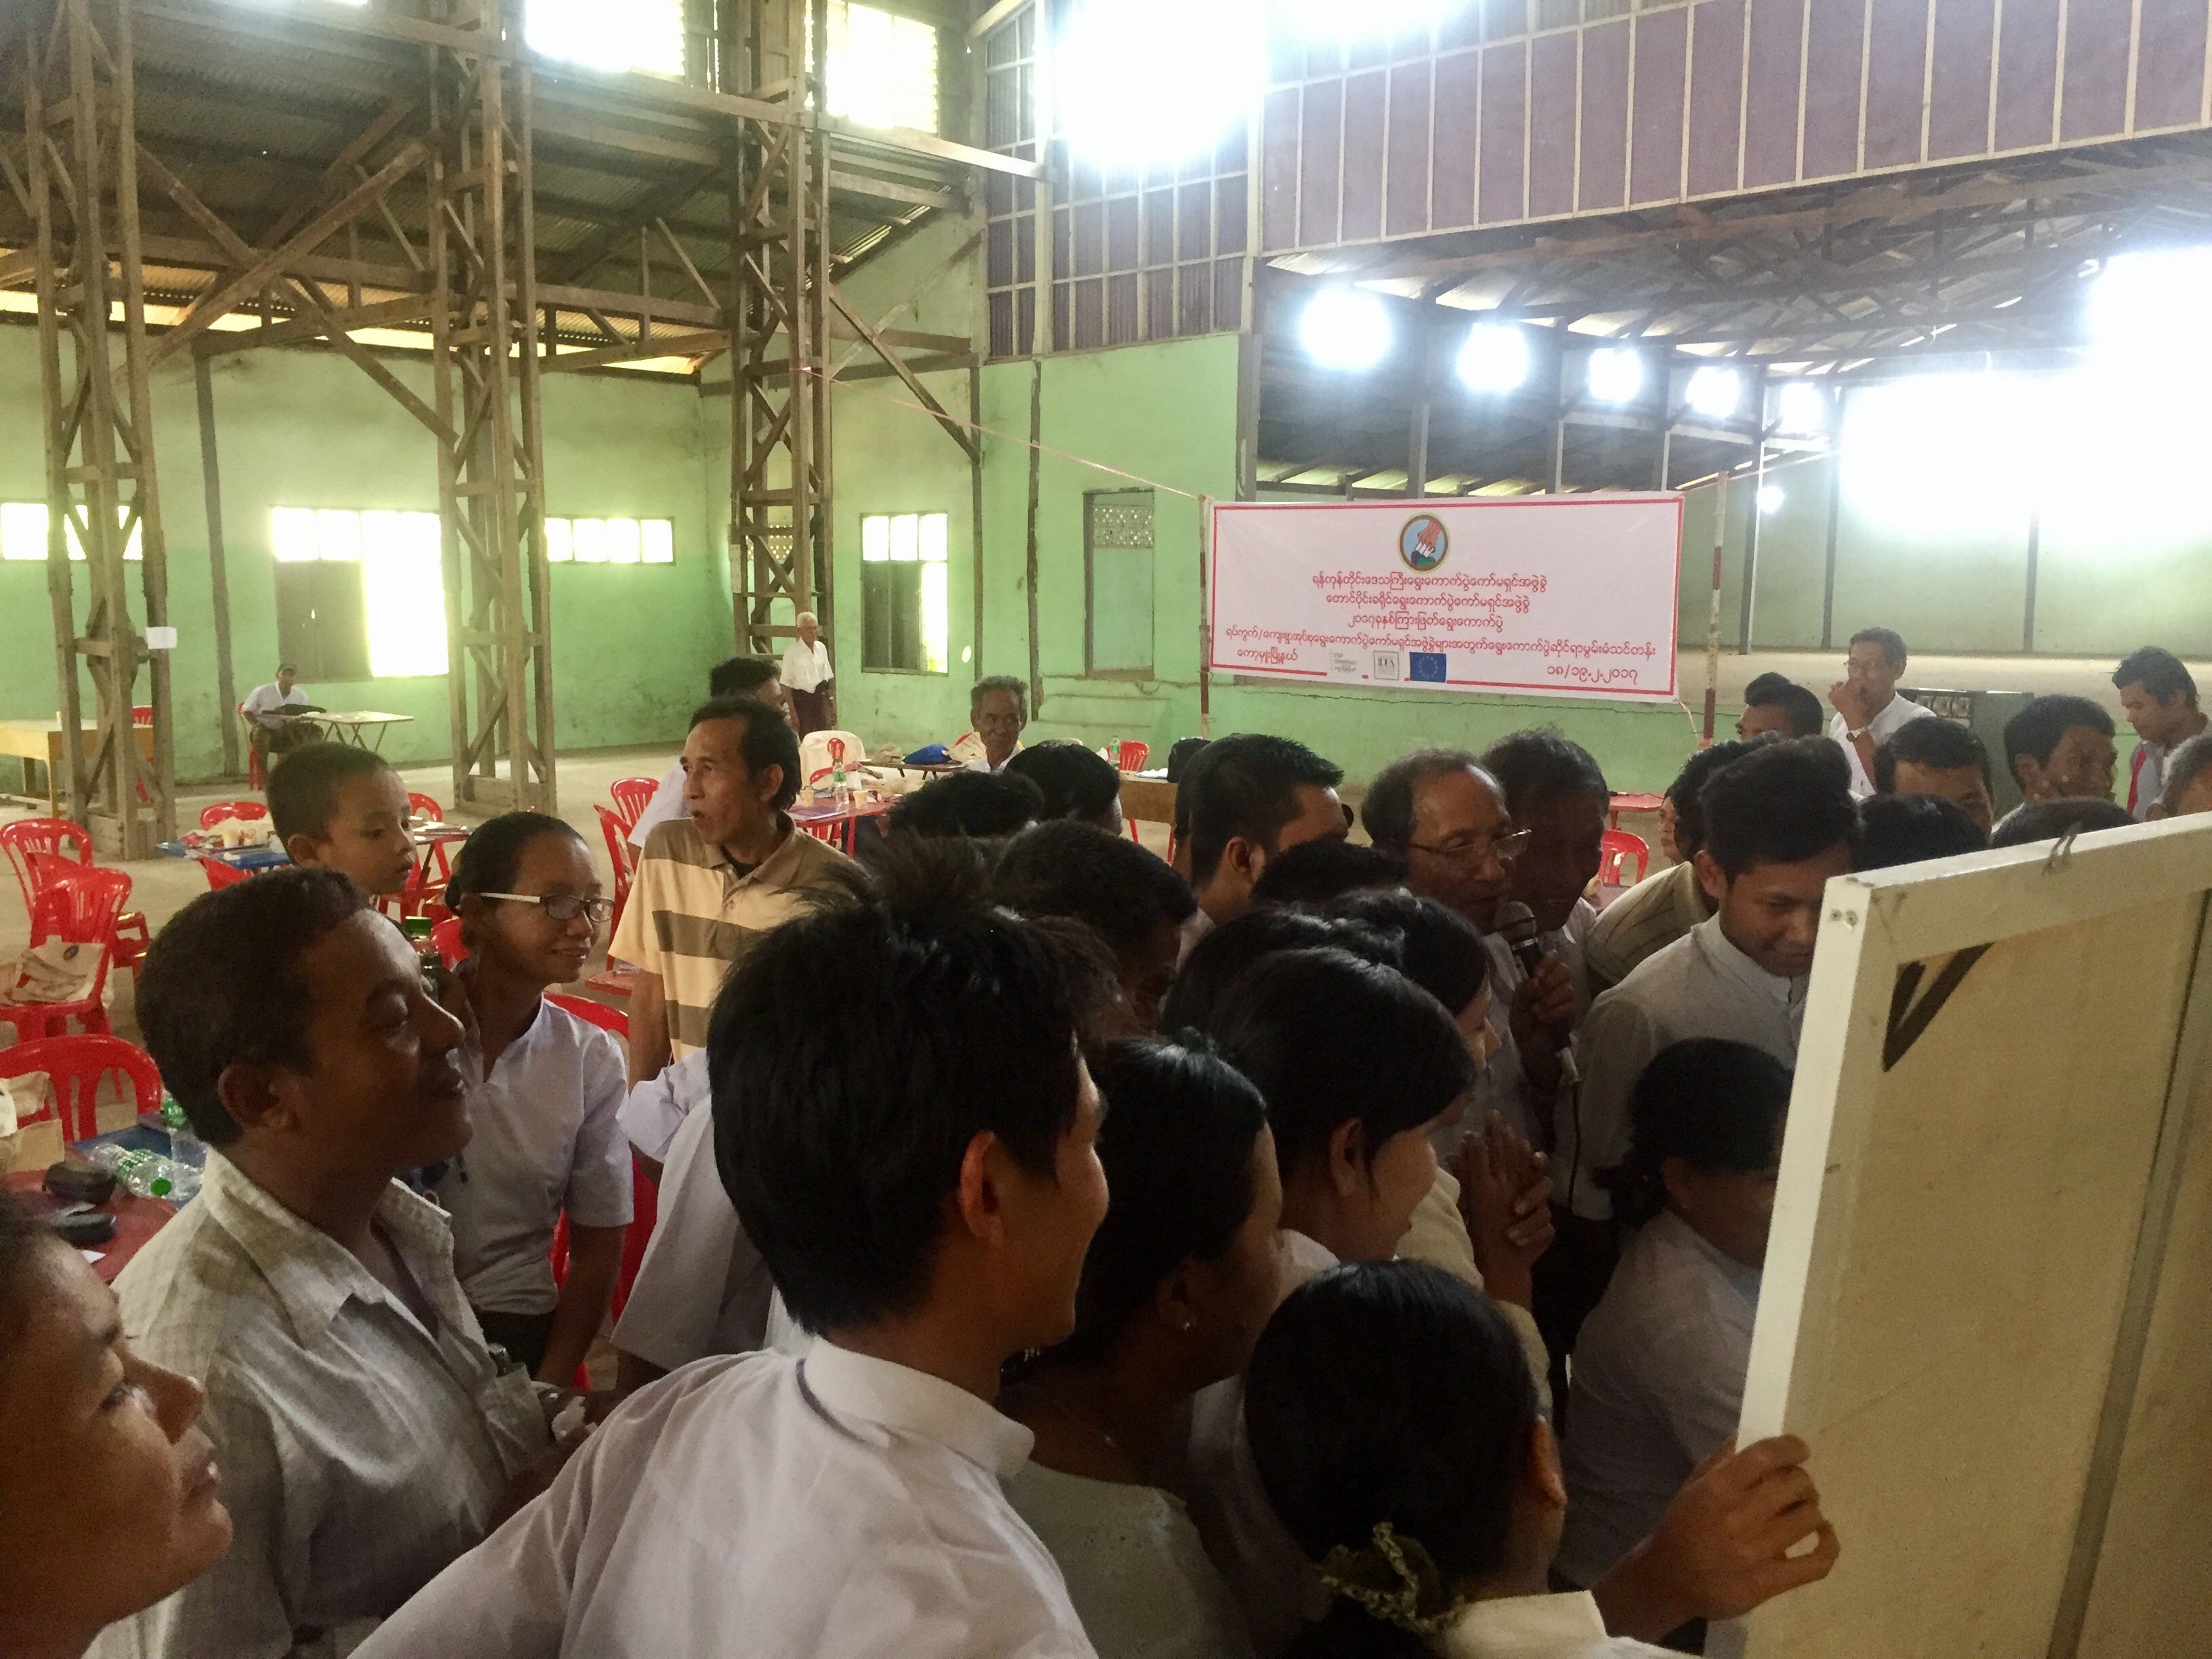 Training of election officials of village-tracts and wards in the township of Kawmhu. The seat of Kawmhu township in the Pyithu Hluttaw (House of Representatives) was won in 2015 by Daw Aung San Suu Kyi, who then became Foreign Minister and State Counselor in the new government.